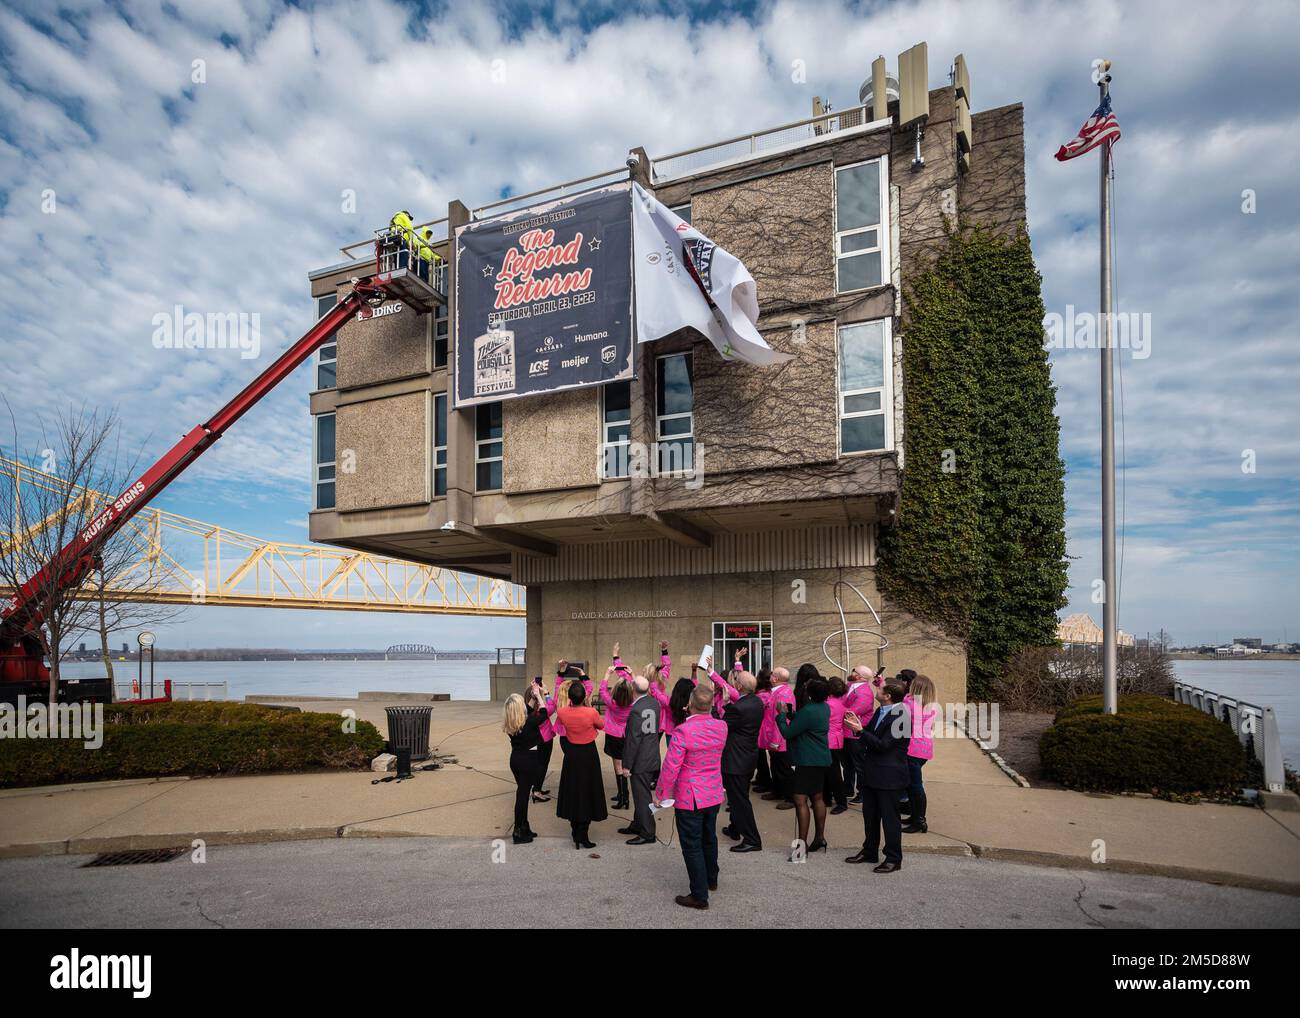 Members of the Kentucky Derby Festival unveil a banner promoting the 2022 Thunder Over Louisville air show and fireworks display during a press conference held along the Ohio River in downtown Louisville, Ky., March 3, 2022. Thunder will return to the waterfront April 23 after a two-year absence and is expected to feature dozens of aircraft, including the U.S. Air Force F-22 Raptor Demo Team and a brand-new C-130J Super Hercules from the Kentucky Air National Guard. This year’s event celebrates the 75th anniversary of the United States Air Force. Stock Photo